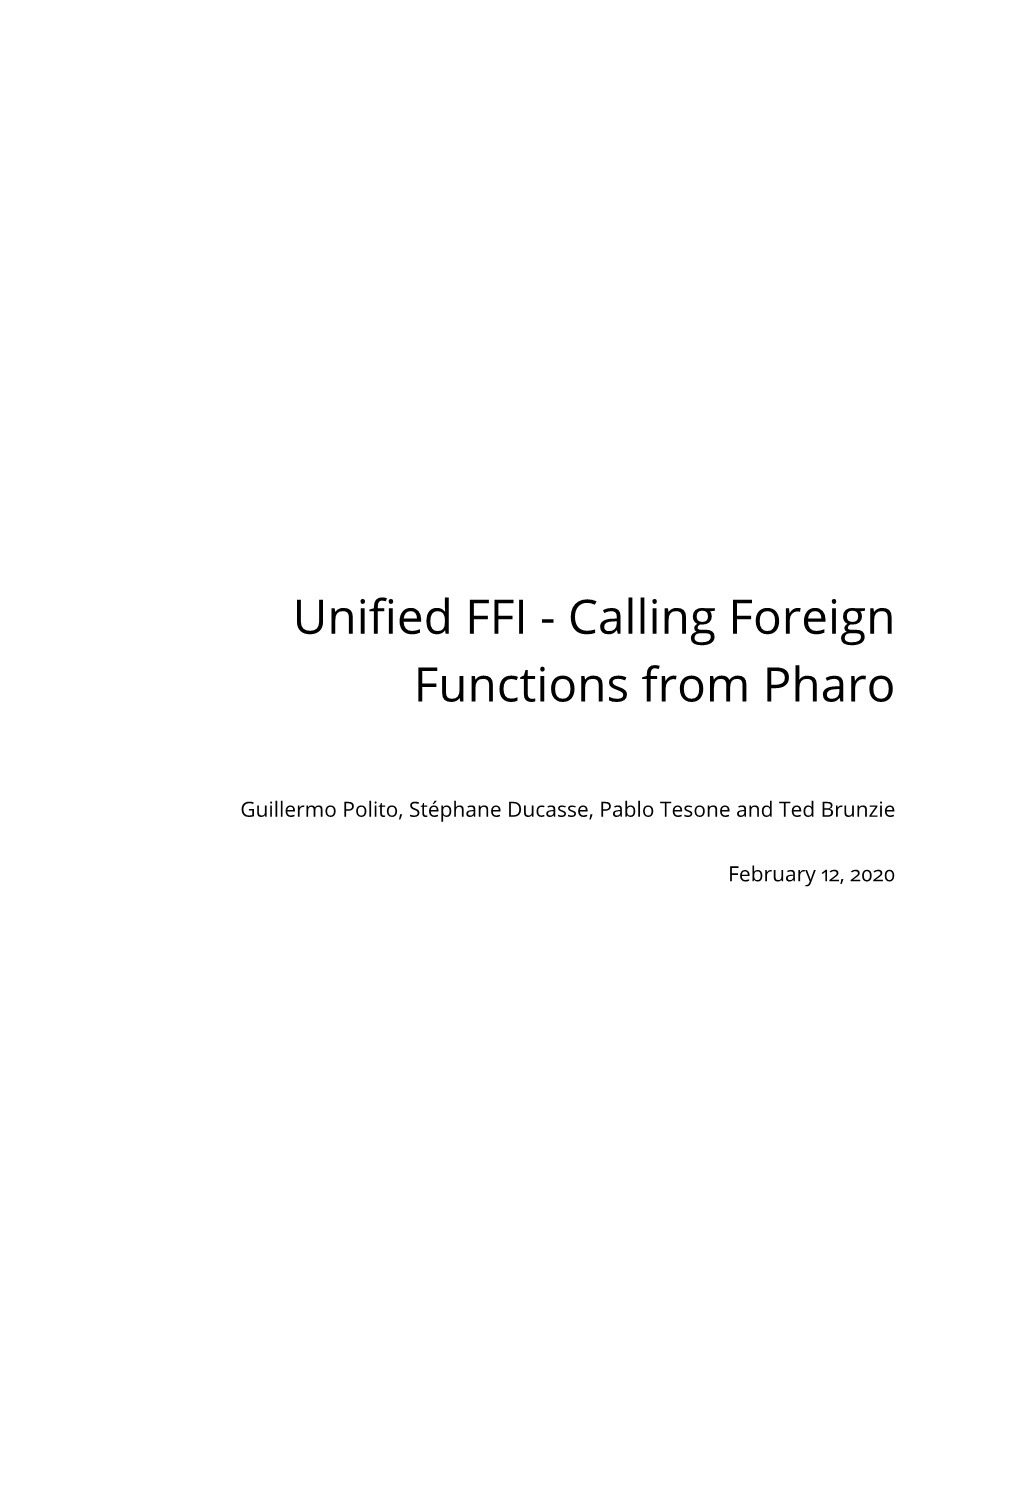 Unified FFI - Calling Foreign Functions from Pharo